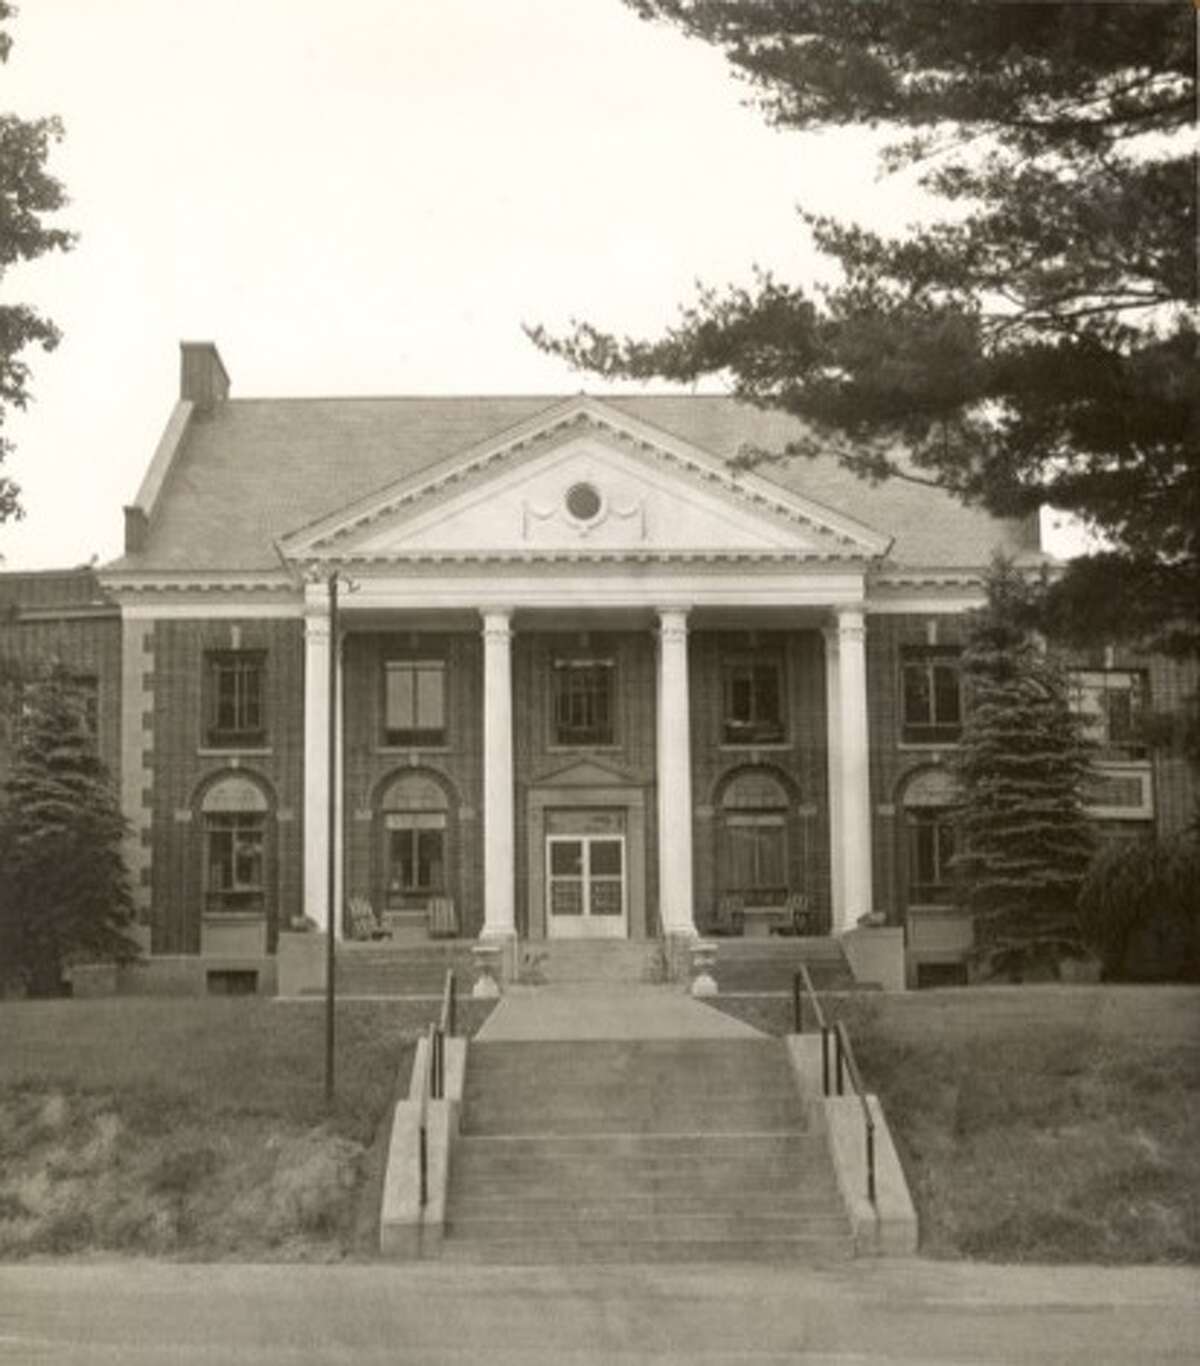 The exterior of The Homestead before it crumbled under neglect. (Saratoga County Historian)